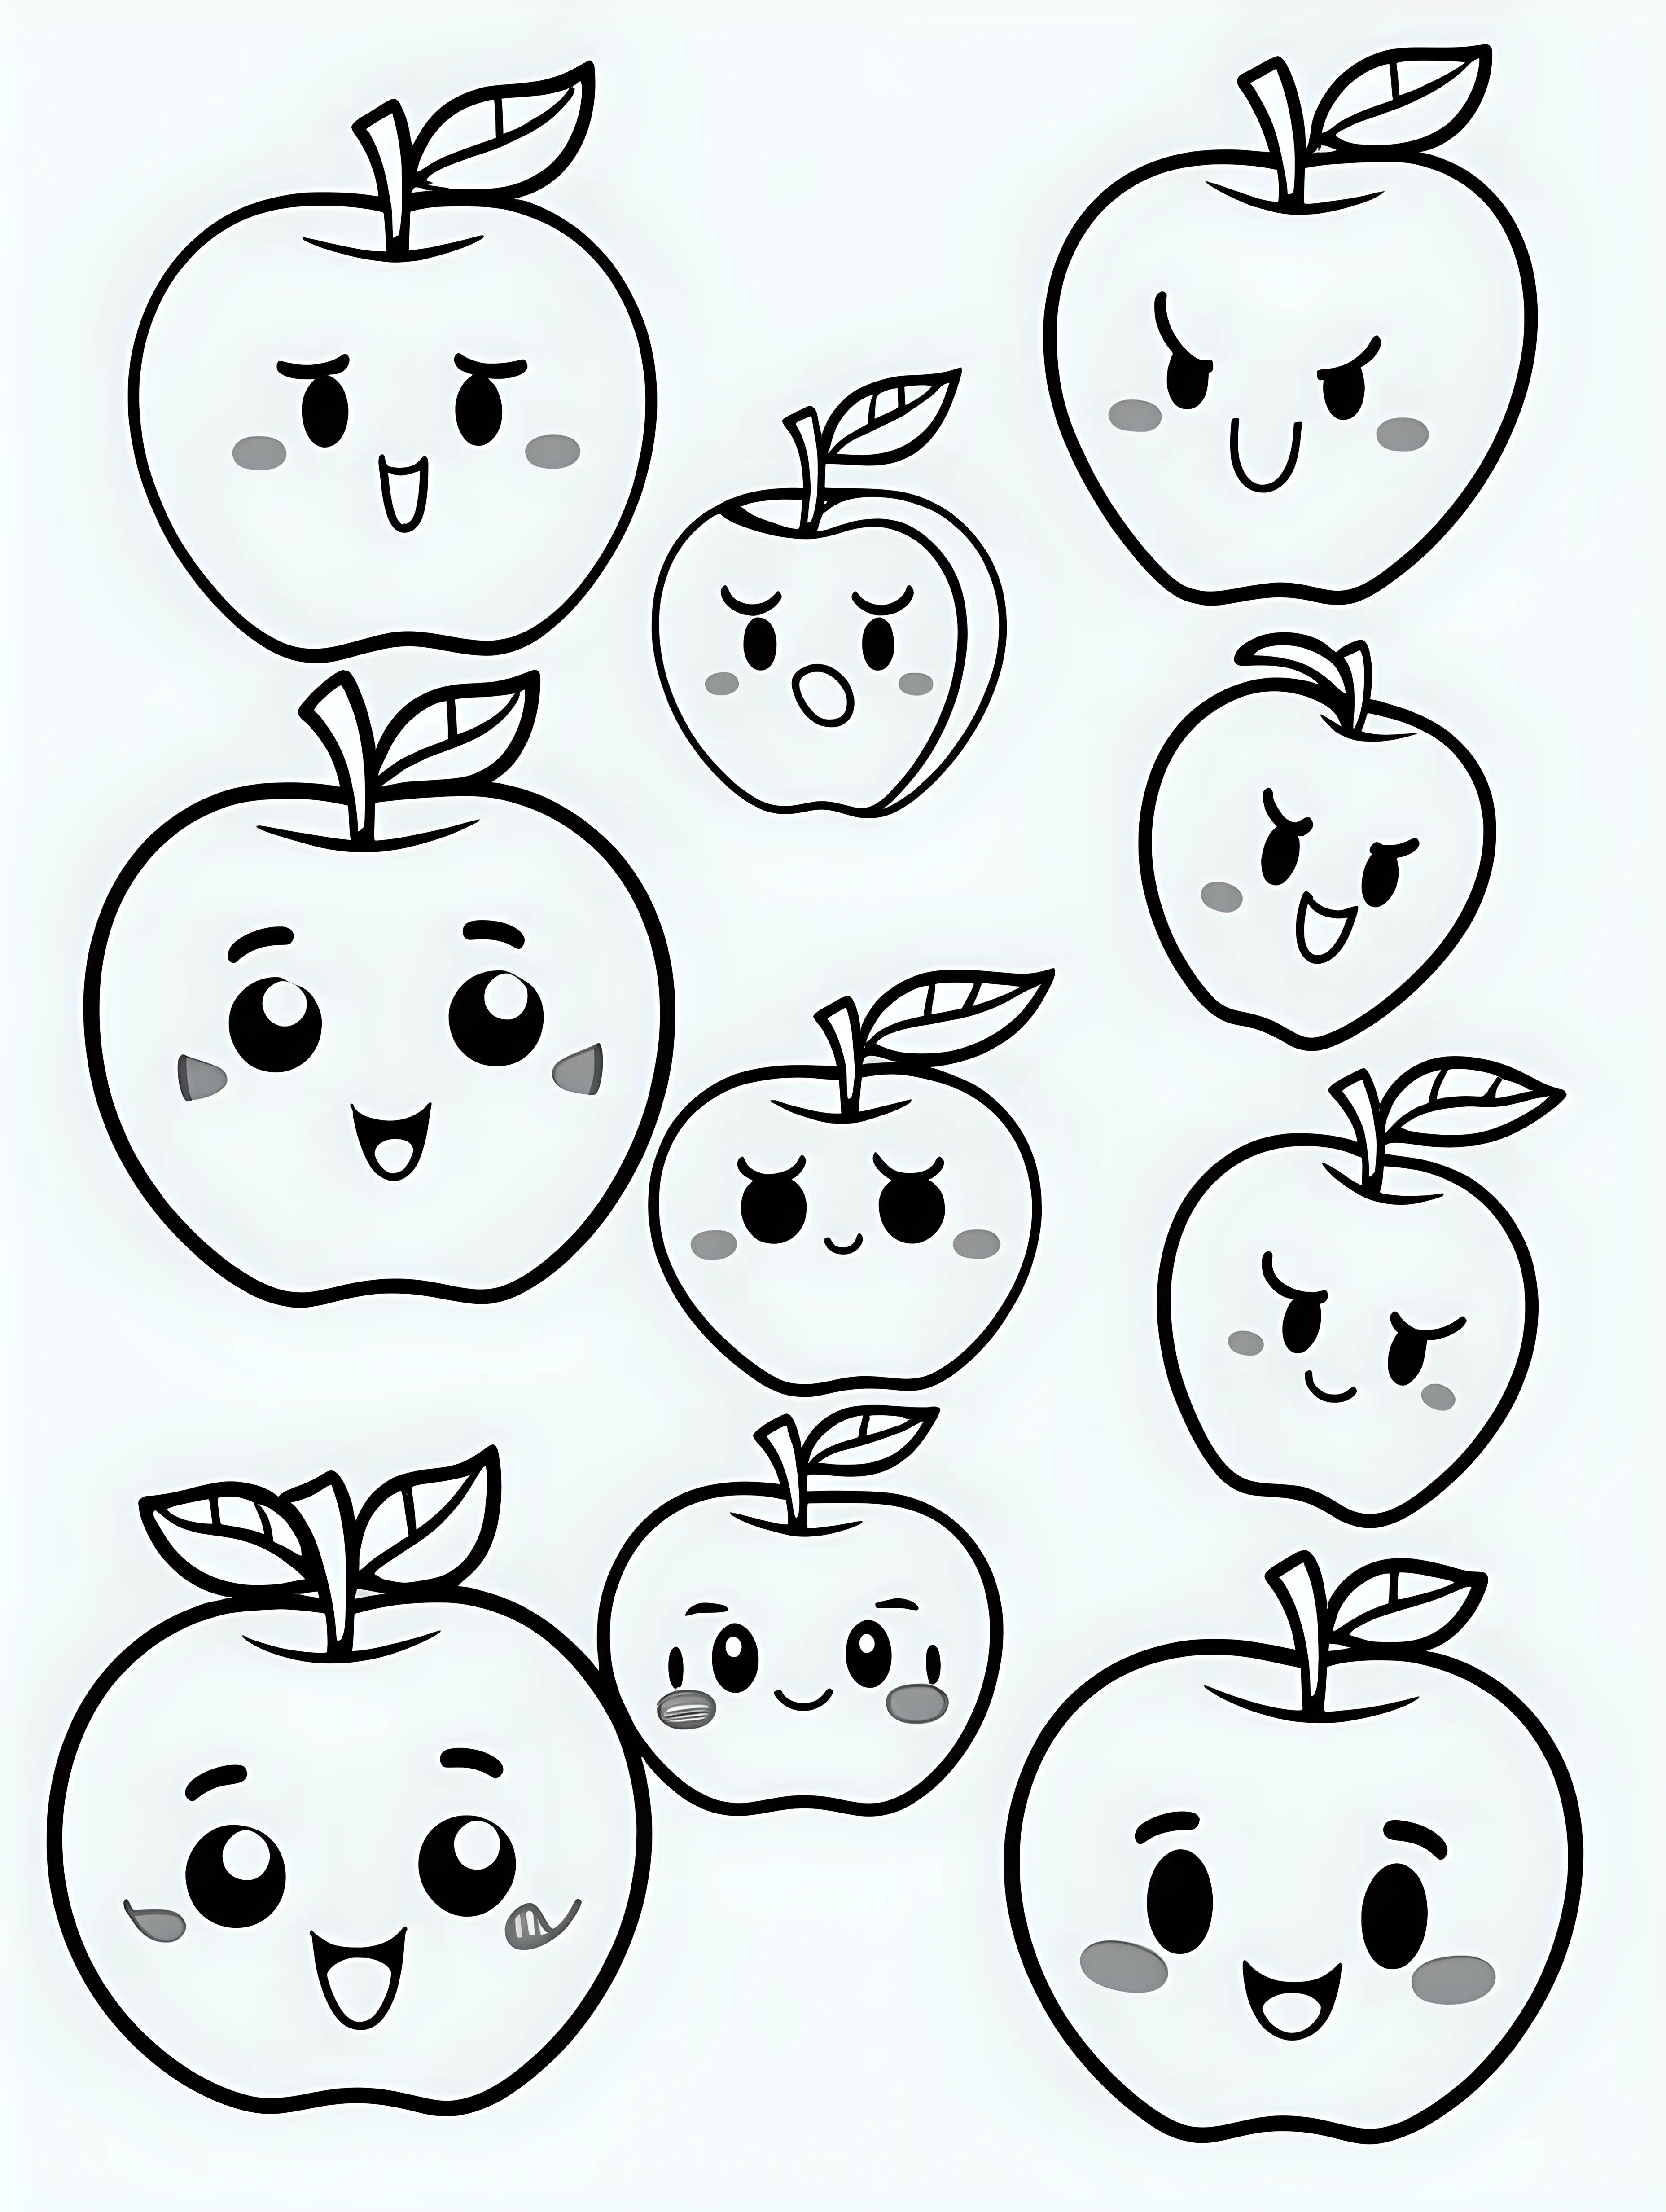 coloring book, cartoon drawing, clean black and white, single line, white background, cute large apples, emojis